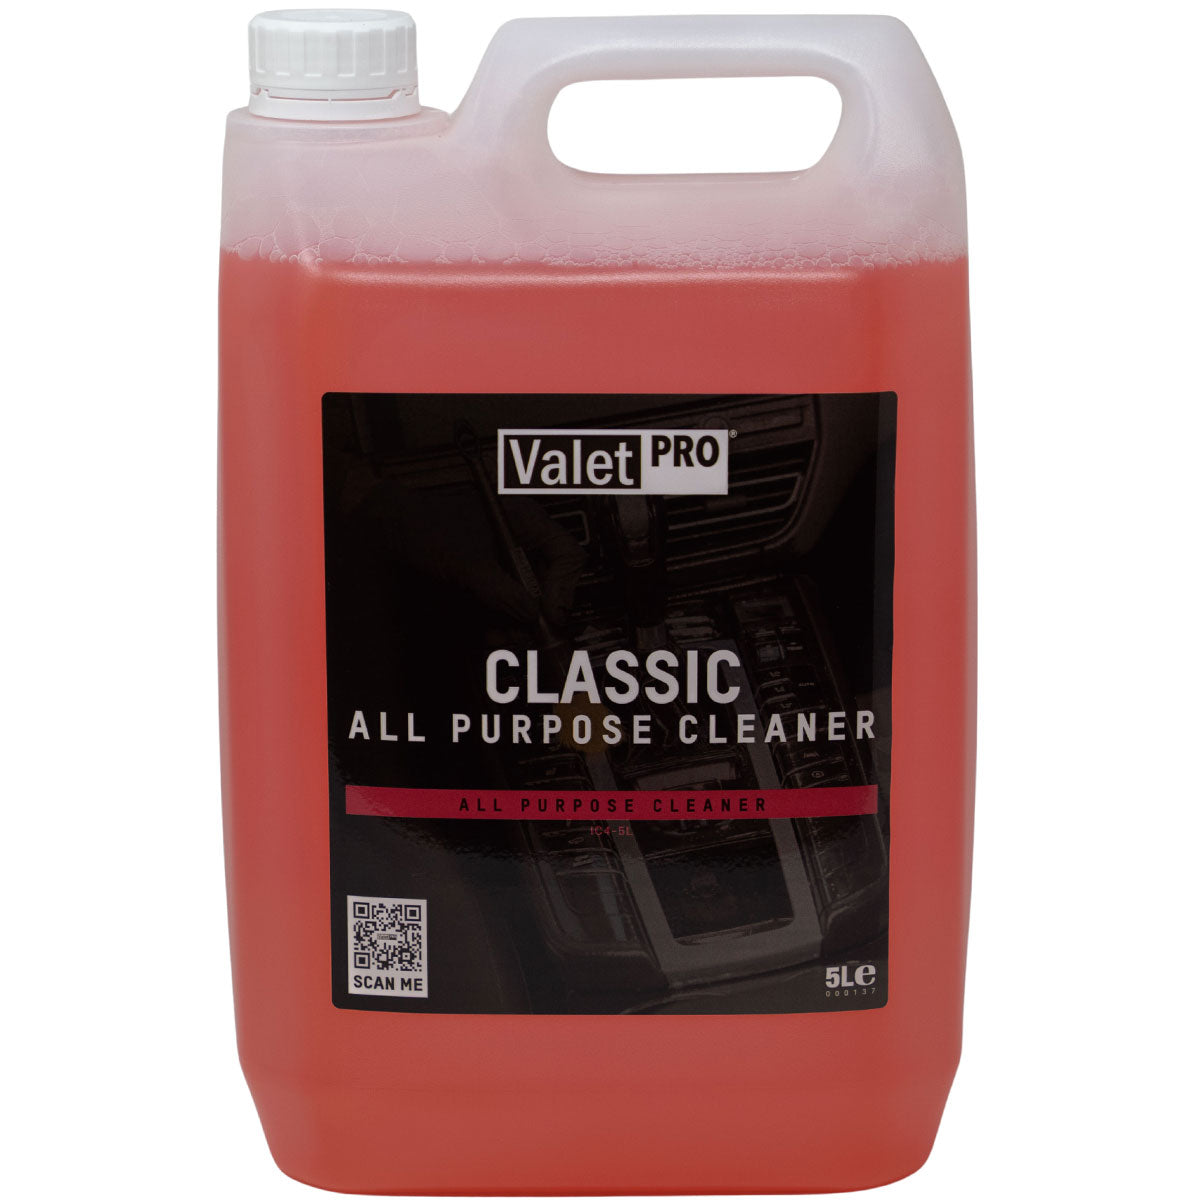 ValetPRO Classic All Purpose Cleaner 5 Litre